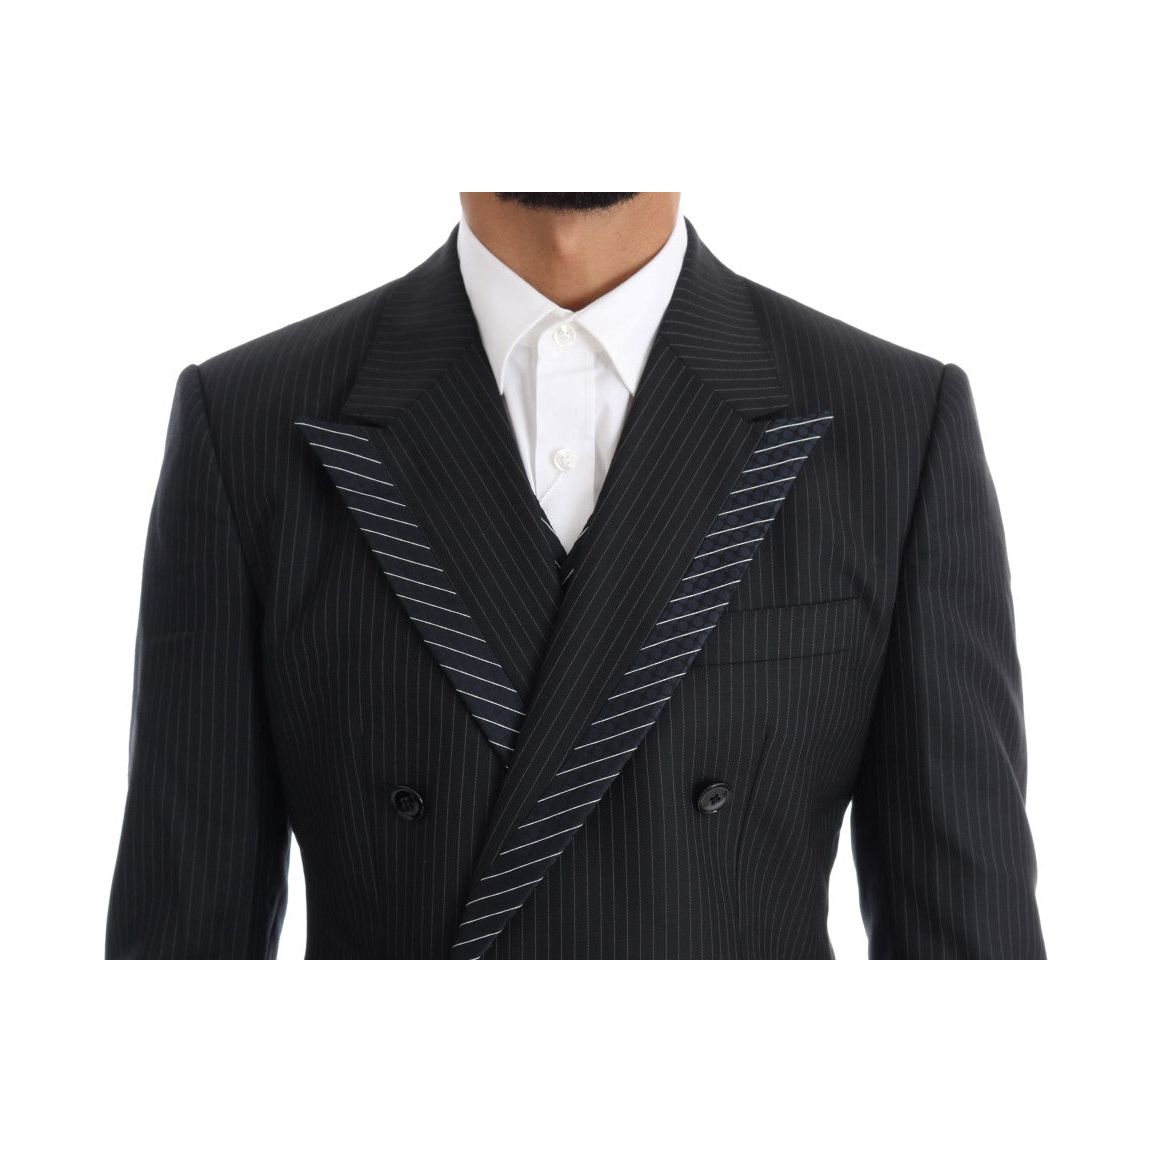 Dolce & Gabbana Elegant Gray Striped Wool Silk Men's 3-Piece Suit gray-double-breasted-3-piece-suit Suit 460447-gray-double-breasted-3-piece-suit-3.jpg